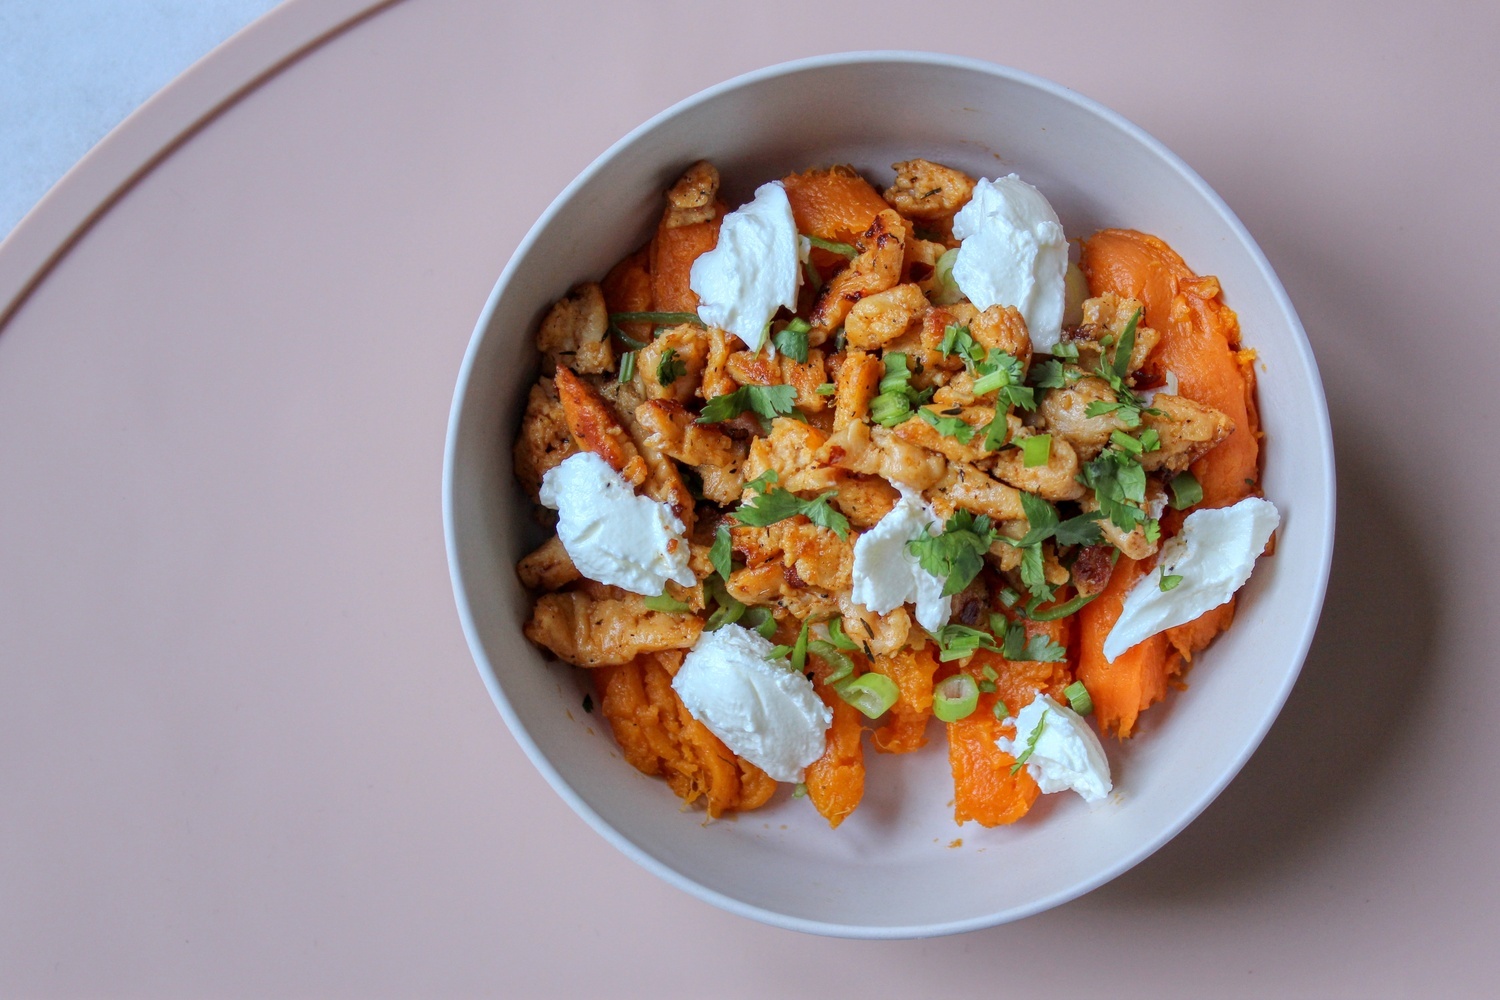 Loaded sweet potato with meat substitute and sour cream